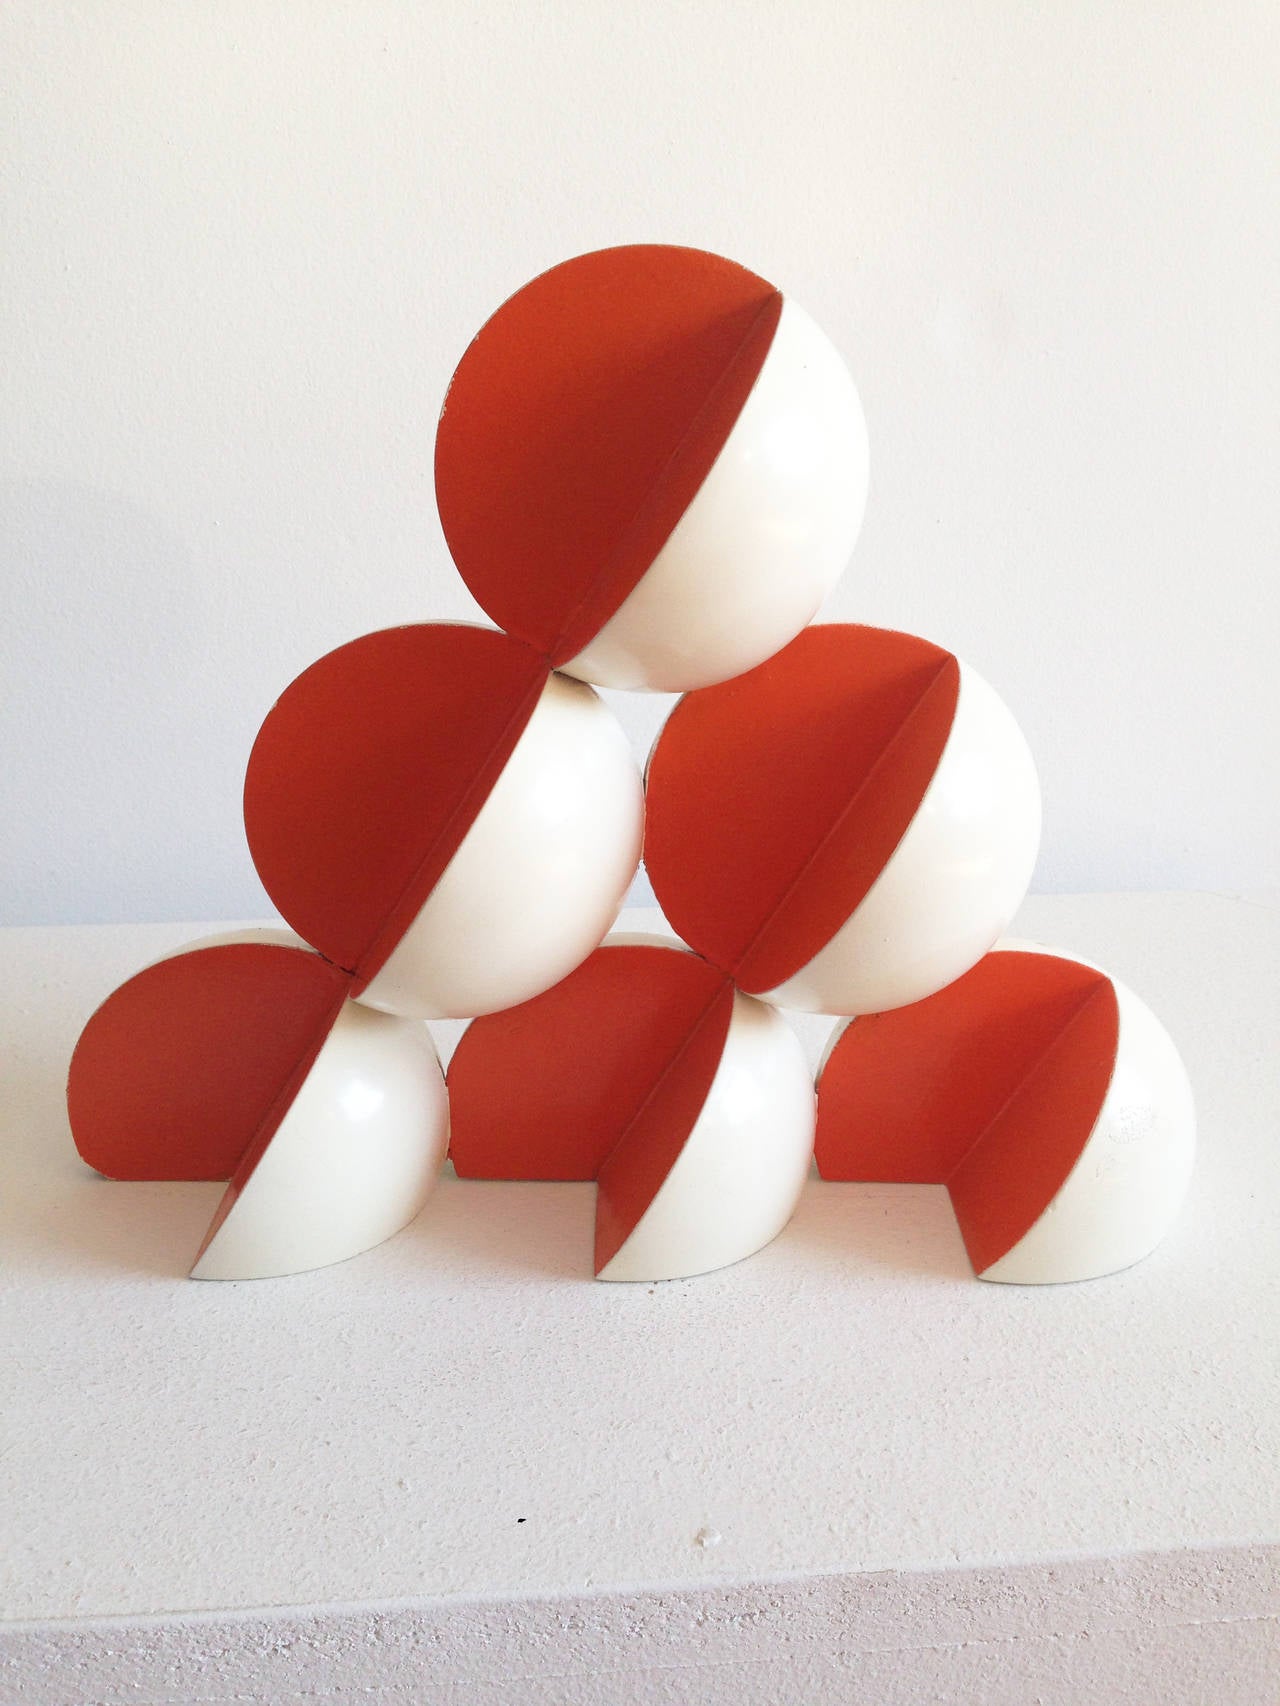 Leon Smith Abstract Sculpture - Bocce (Small Abstract Mid Century Modern Style Red & White Table Sculpture)